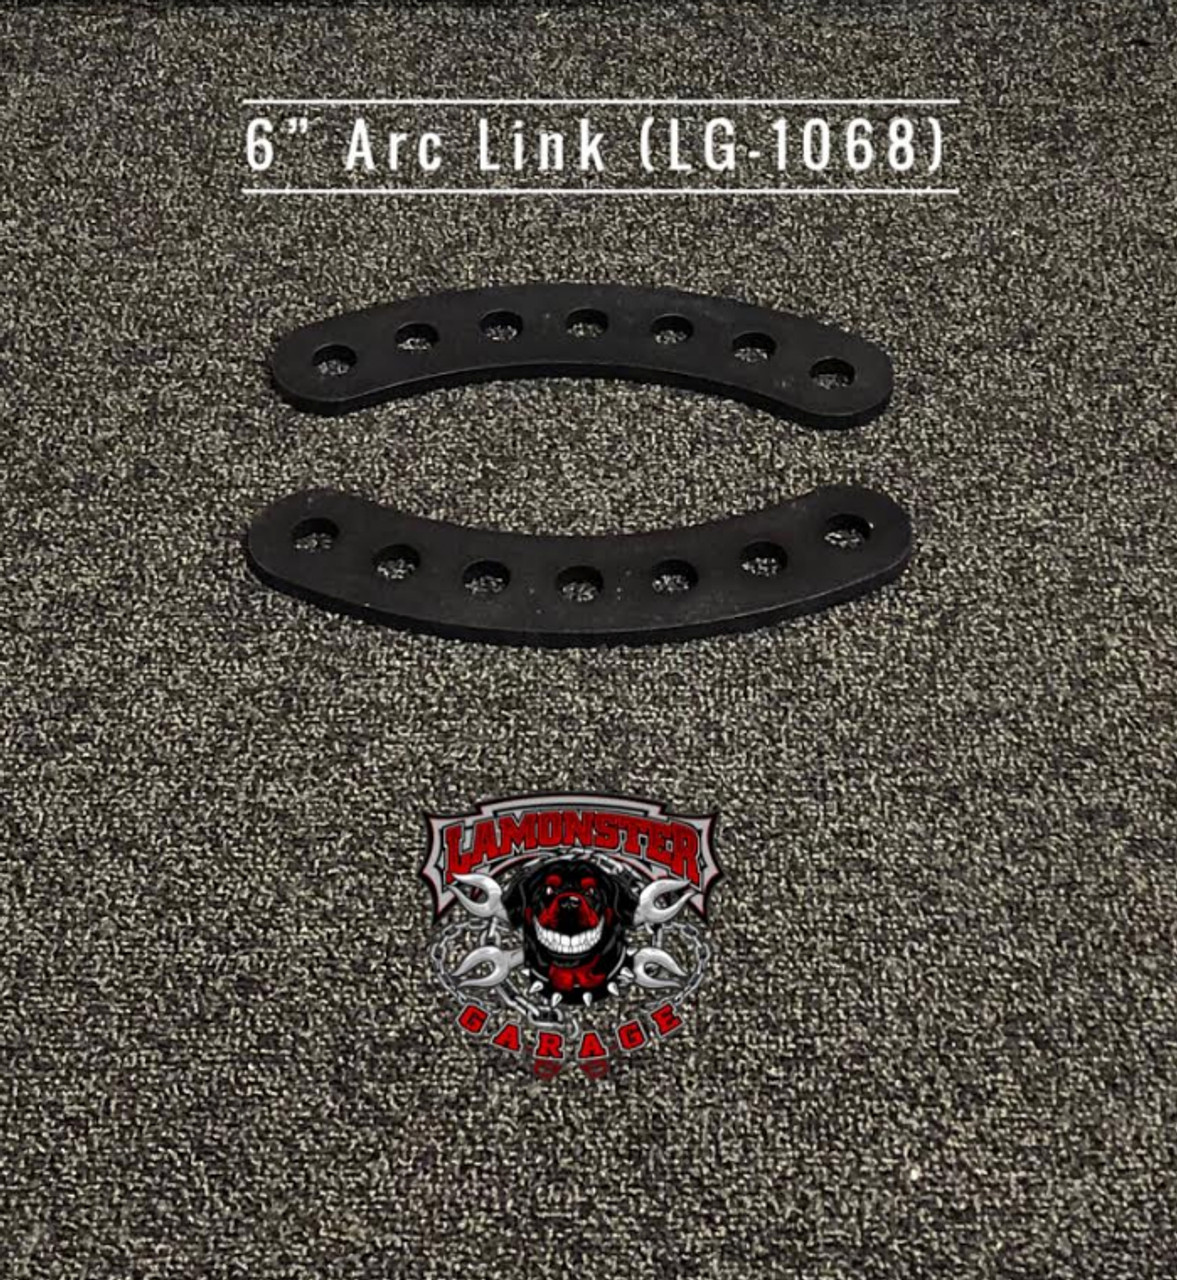 6" Arc Links (LG-1068) by Lamonster
Will work with all Lamonster Hwy Brackets.